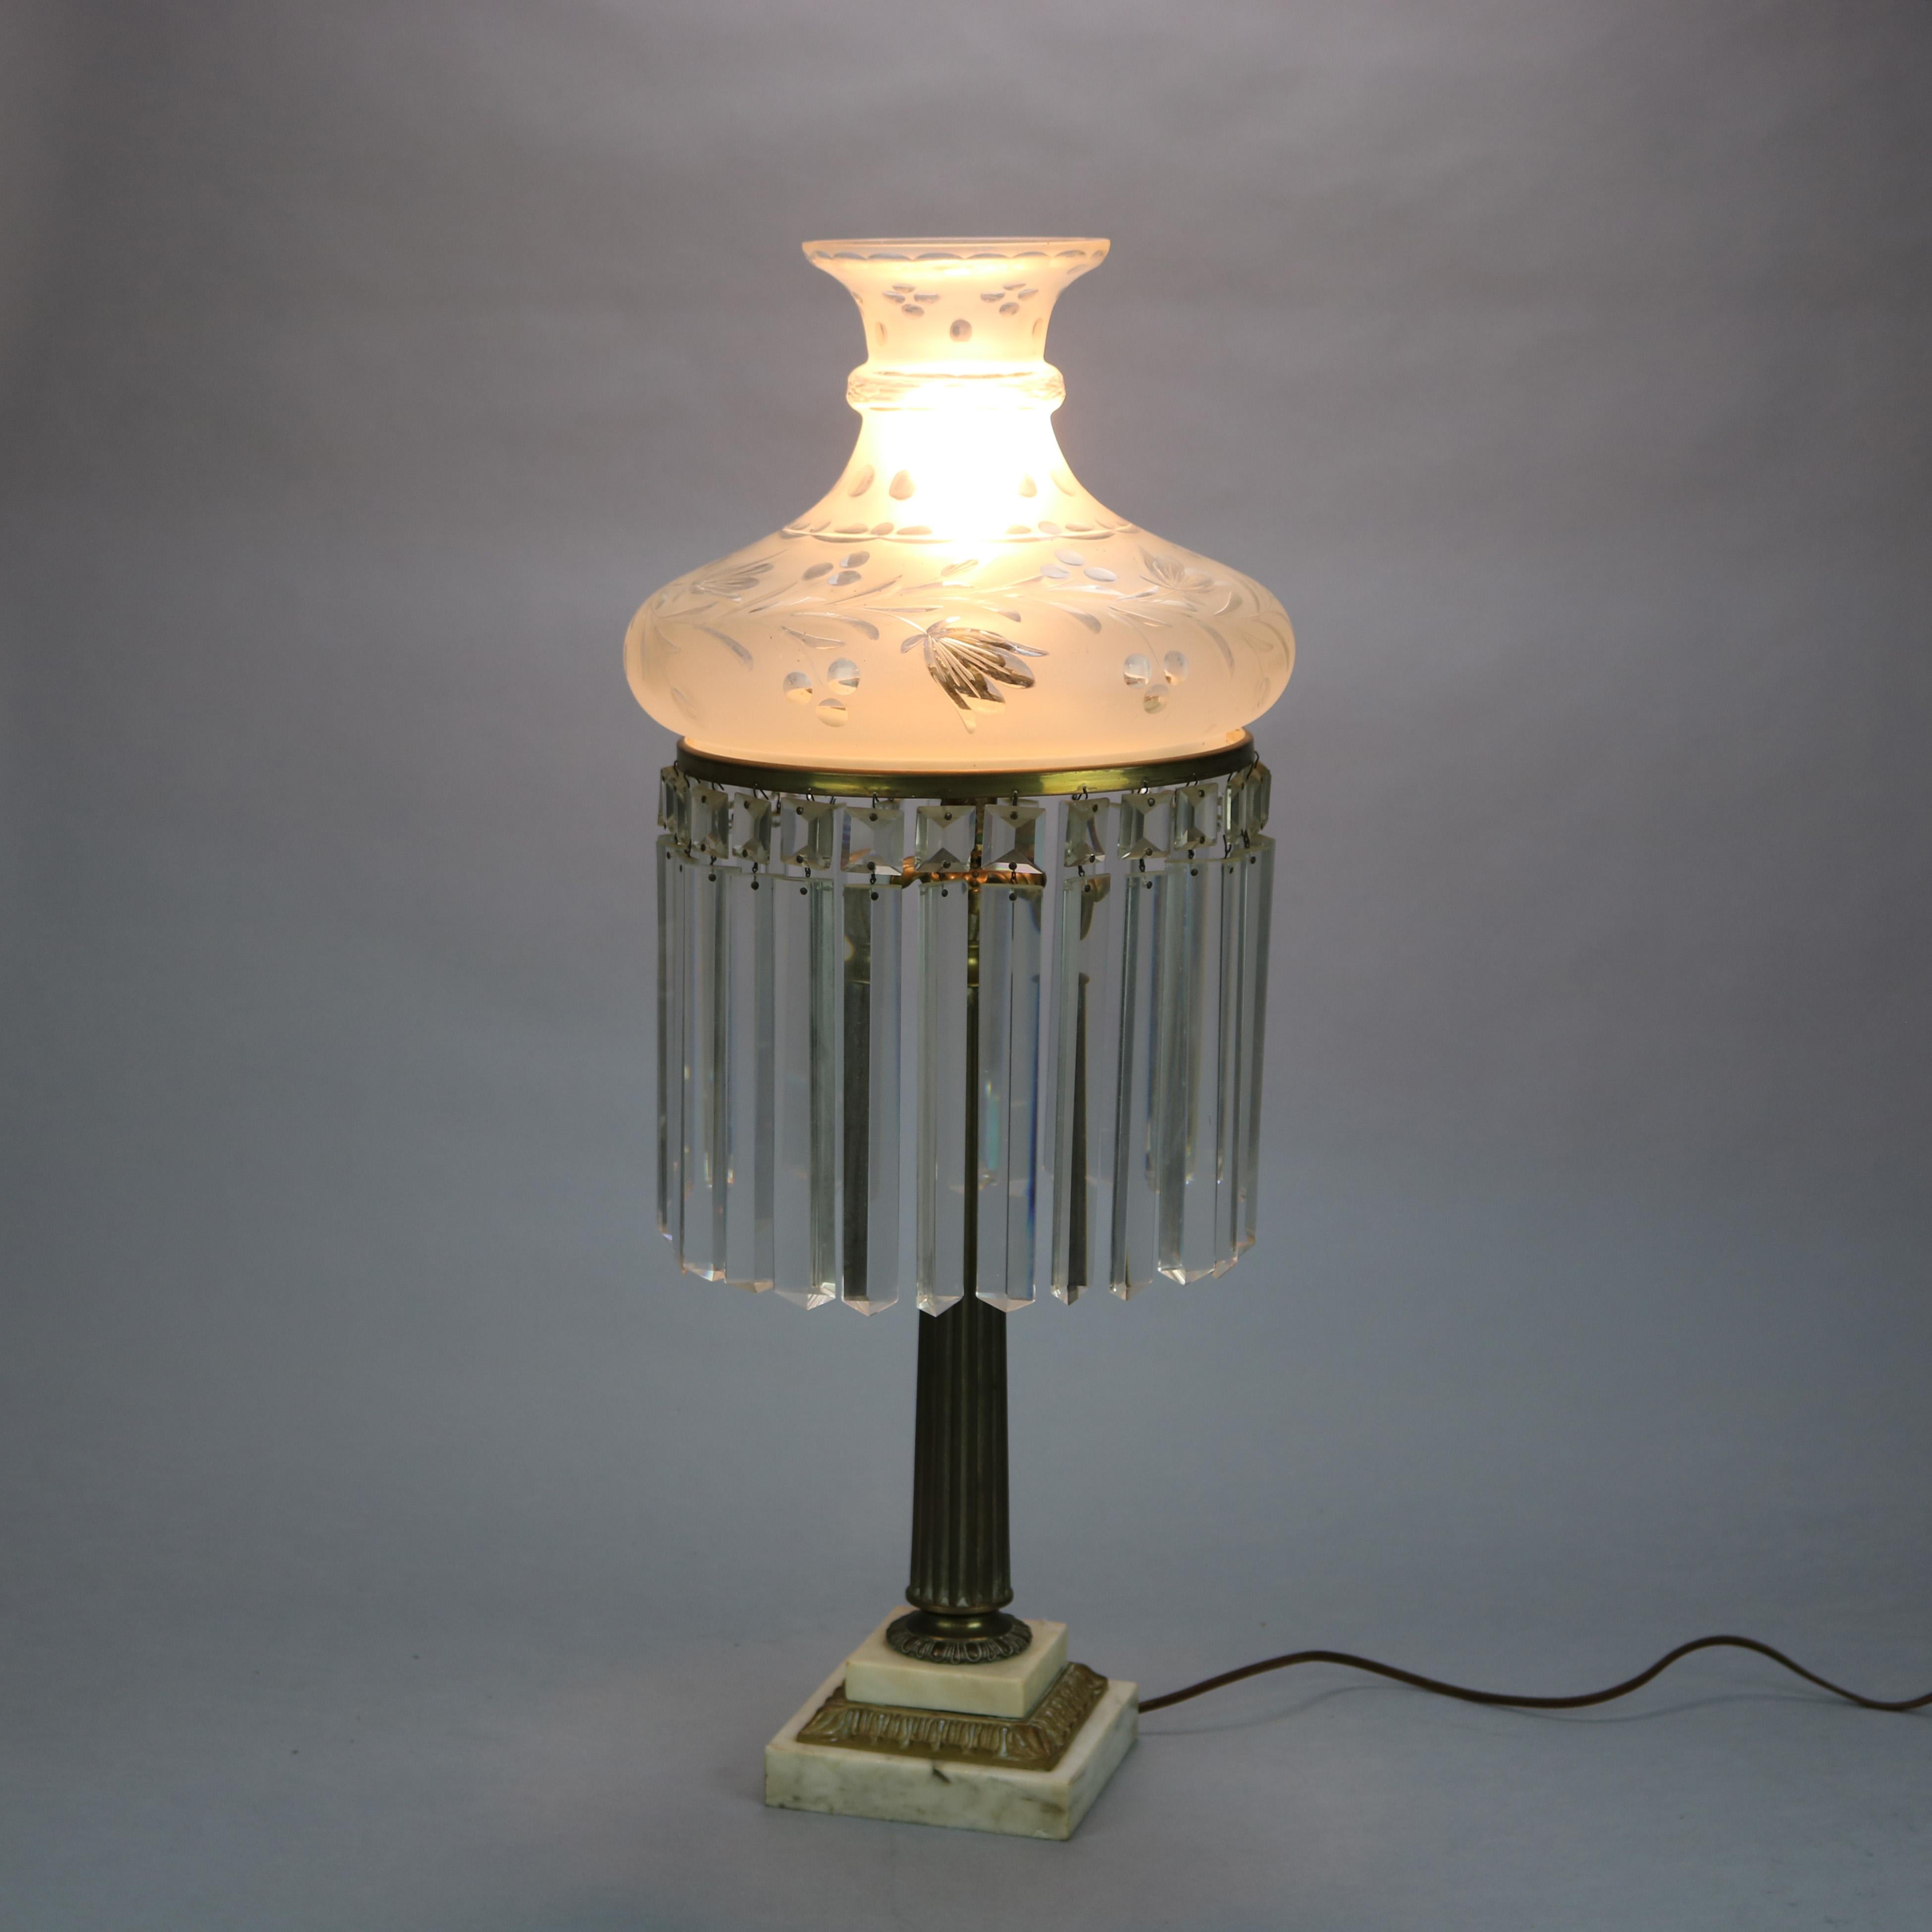 An antique electrified Neoclassical Sinumbra table lamp offers foliate cut glass shade over brass single socket base on stepped marble, hanging cut glass prisms surround, c1840.

Measures: 29.5